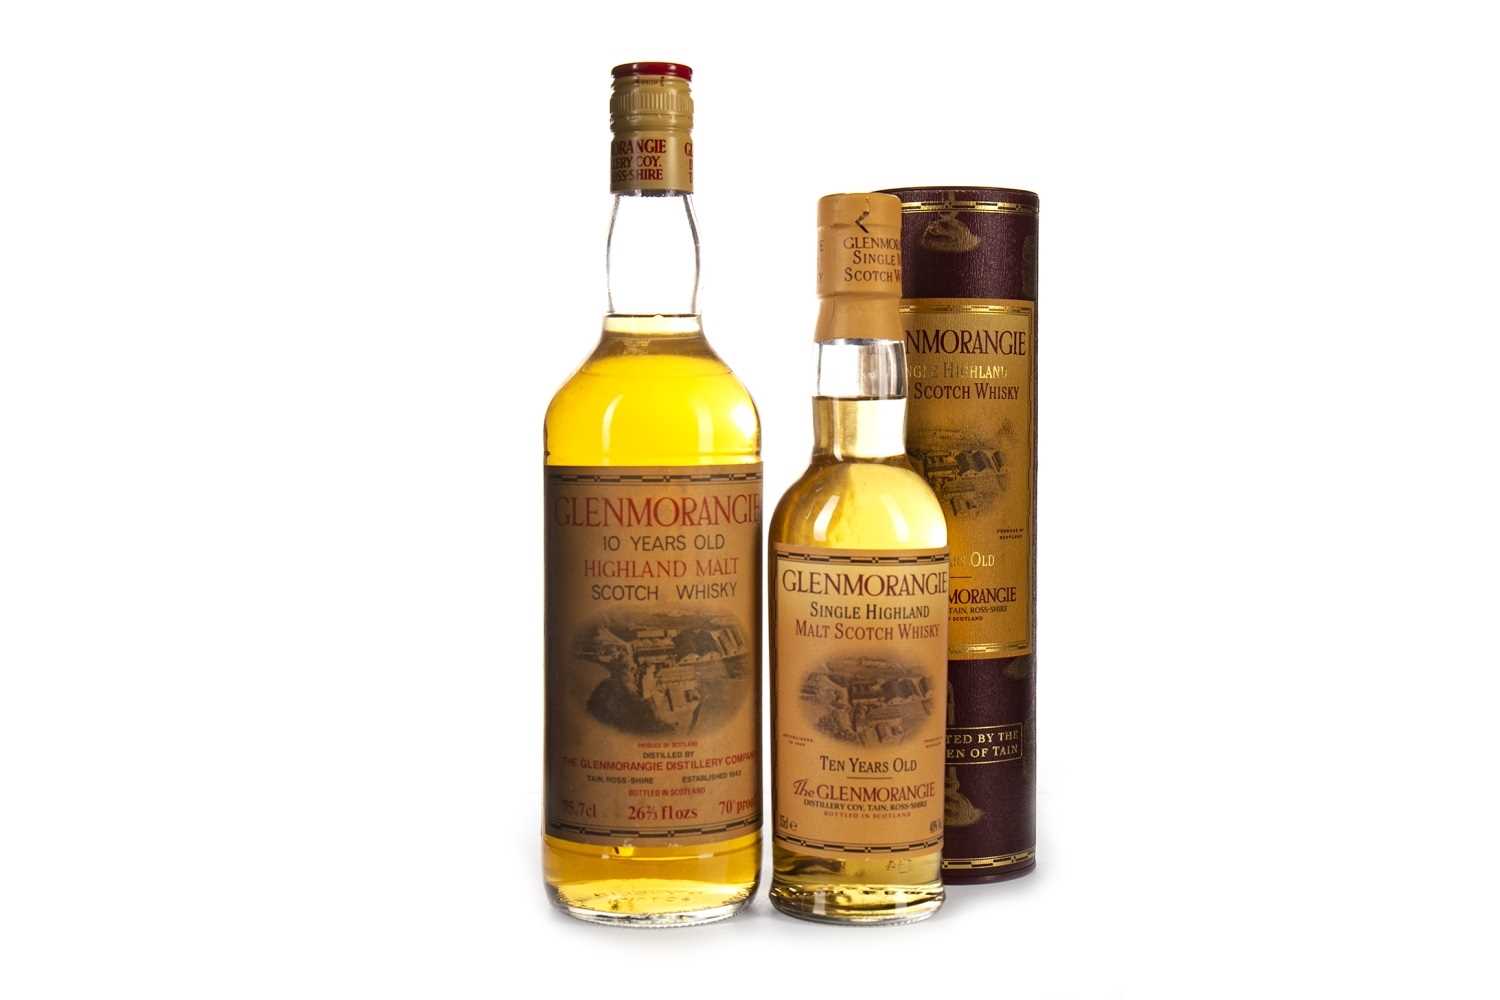 Lot 336 - ONE AND A HALF BOTTLES OF GLENMORANGIE 10 YEARS OLD